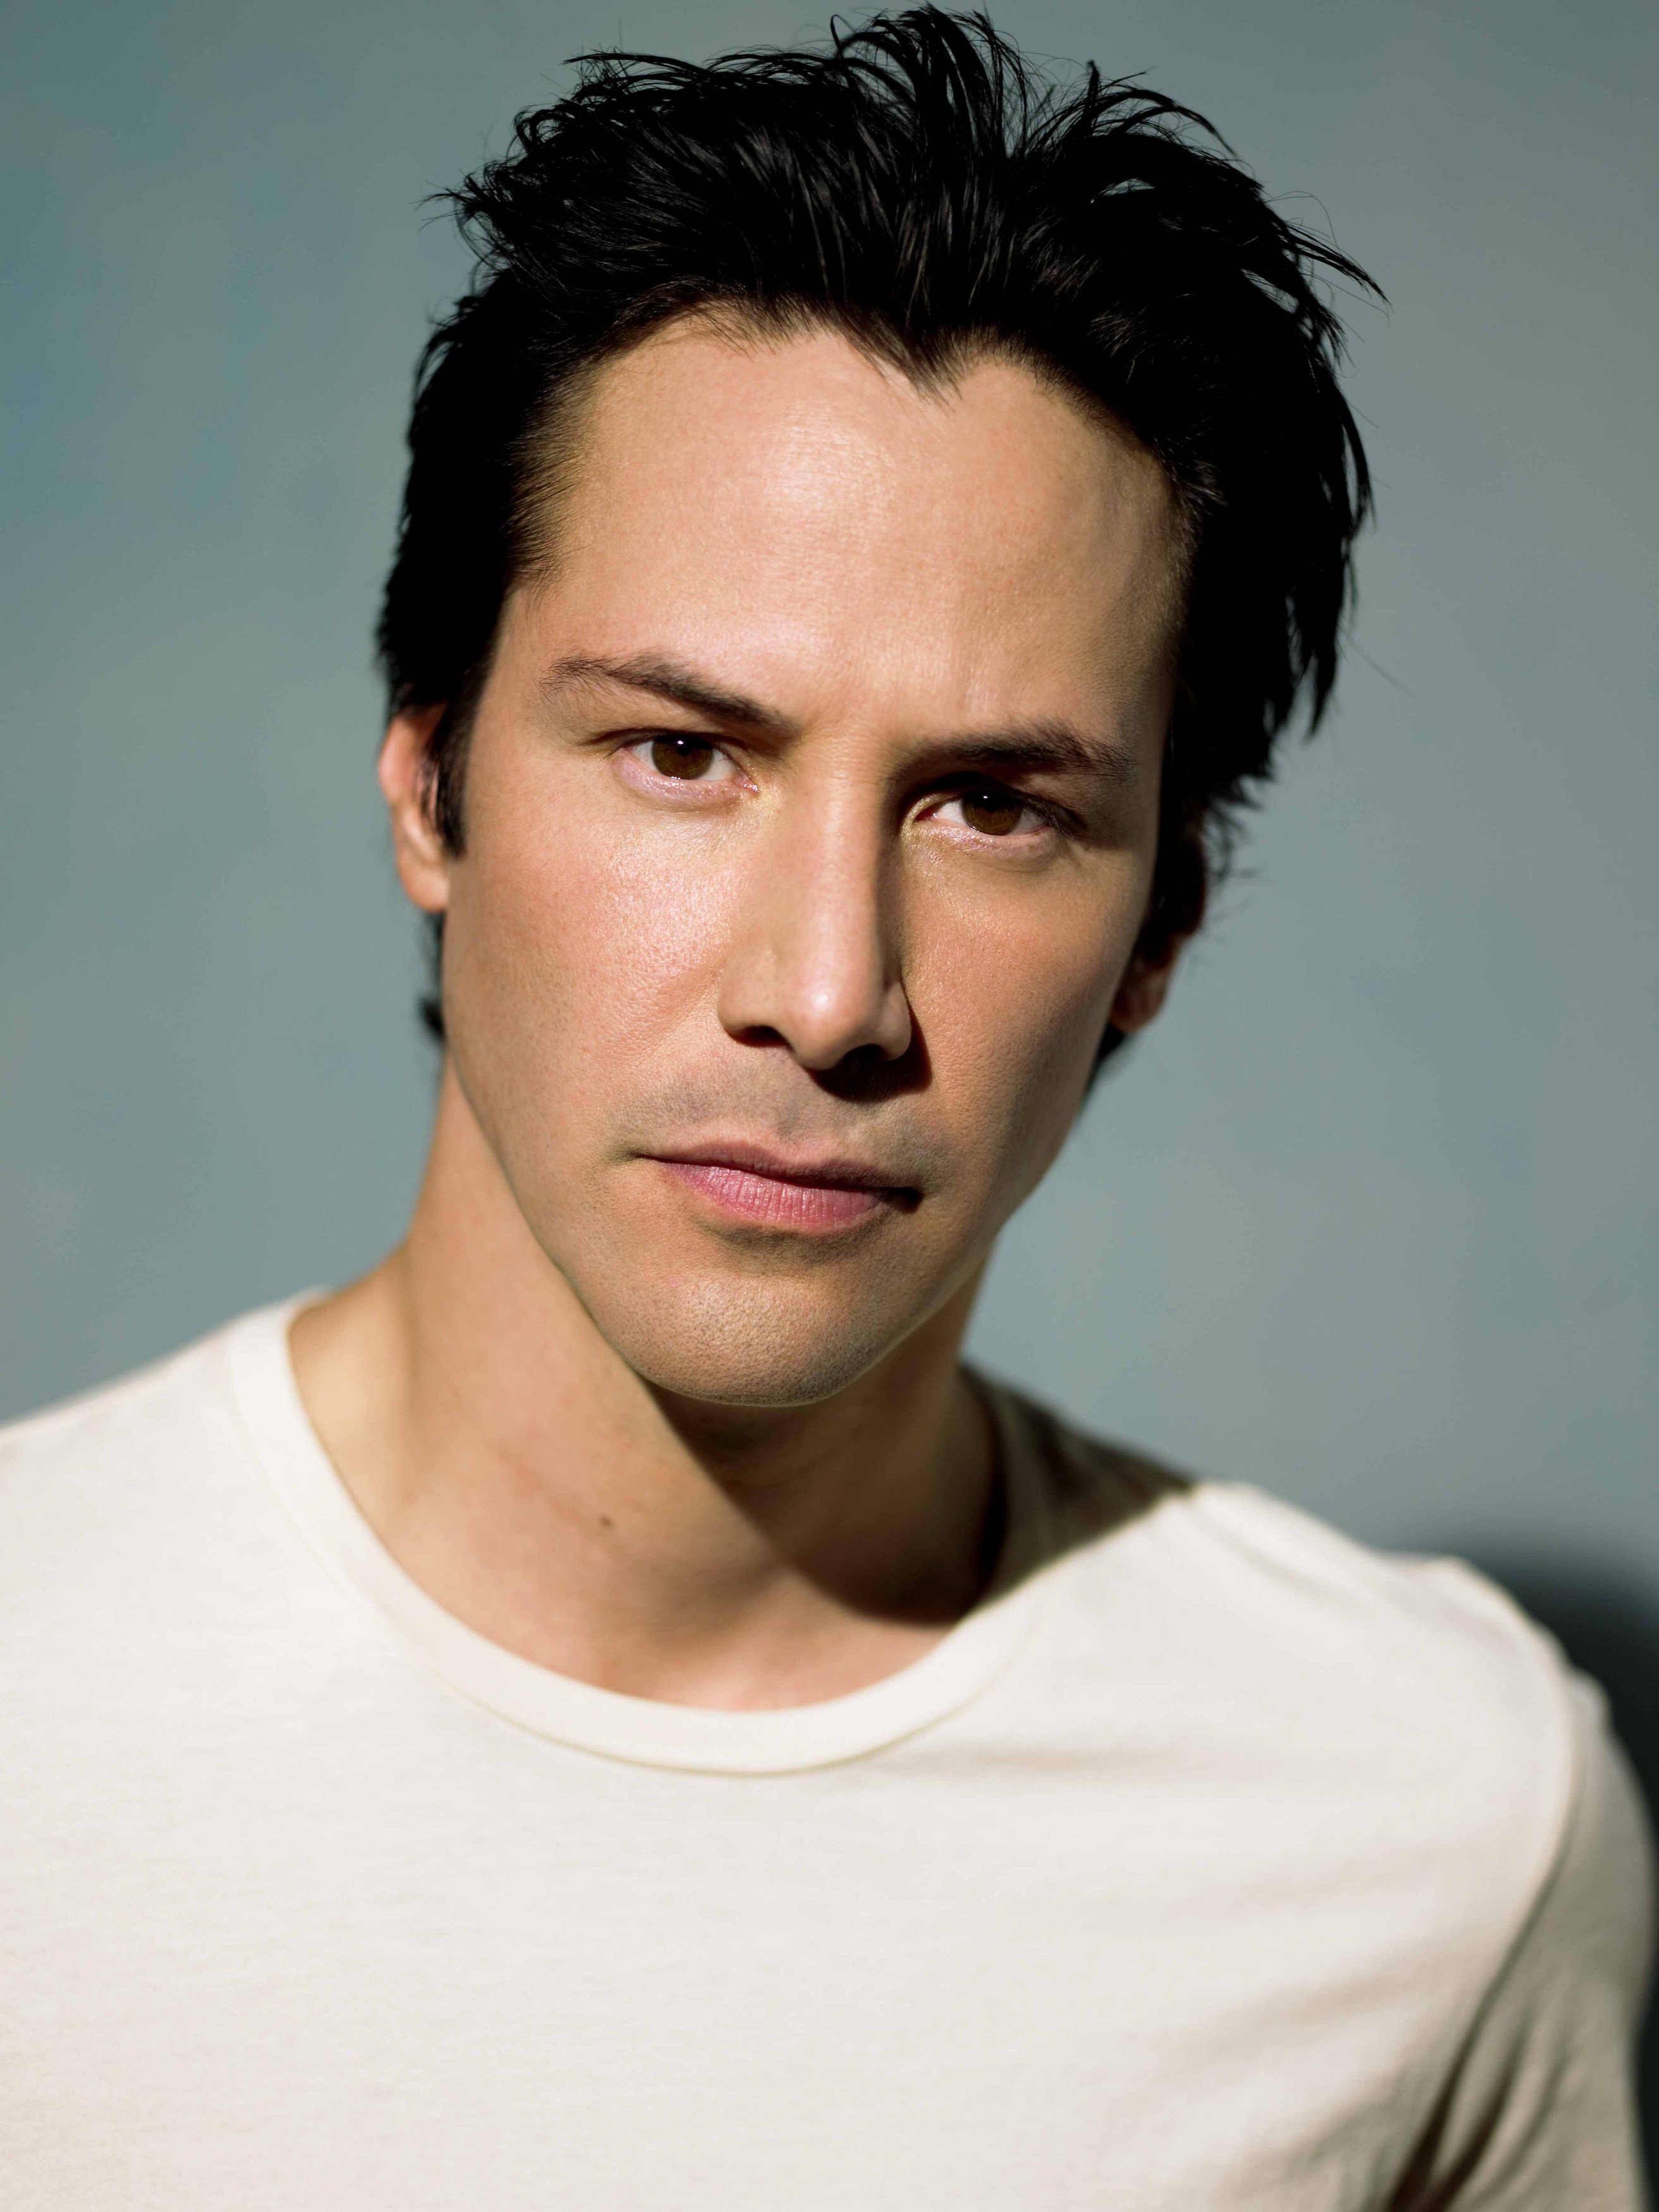 Keanu Reeves photo 38 of 235 pics, wallpaper - photo #58362 - ThePlace2